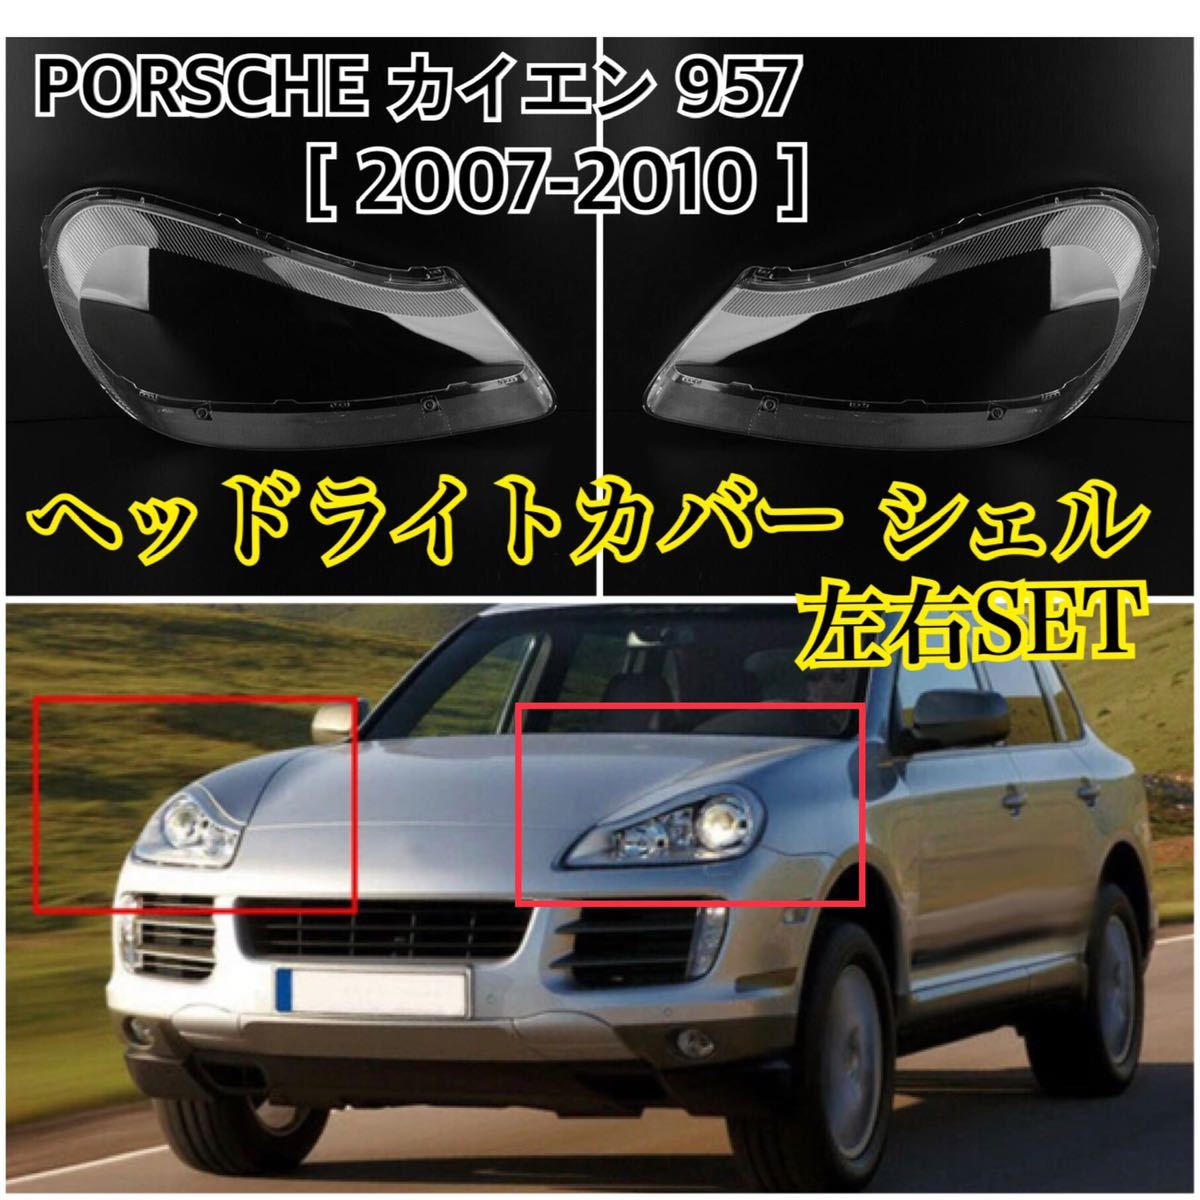  immediate payment * postage included *PORSCHE Cayenne 957 head light cover shell clear lens 2007-2010 year Porsche repair repair & yellow tint also! original exchange 